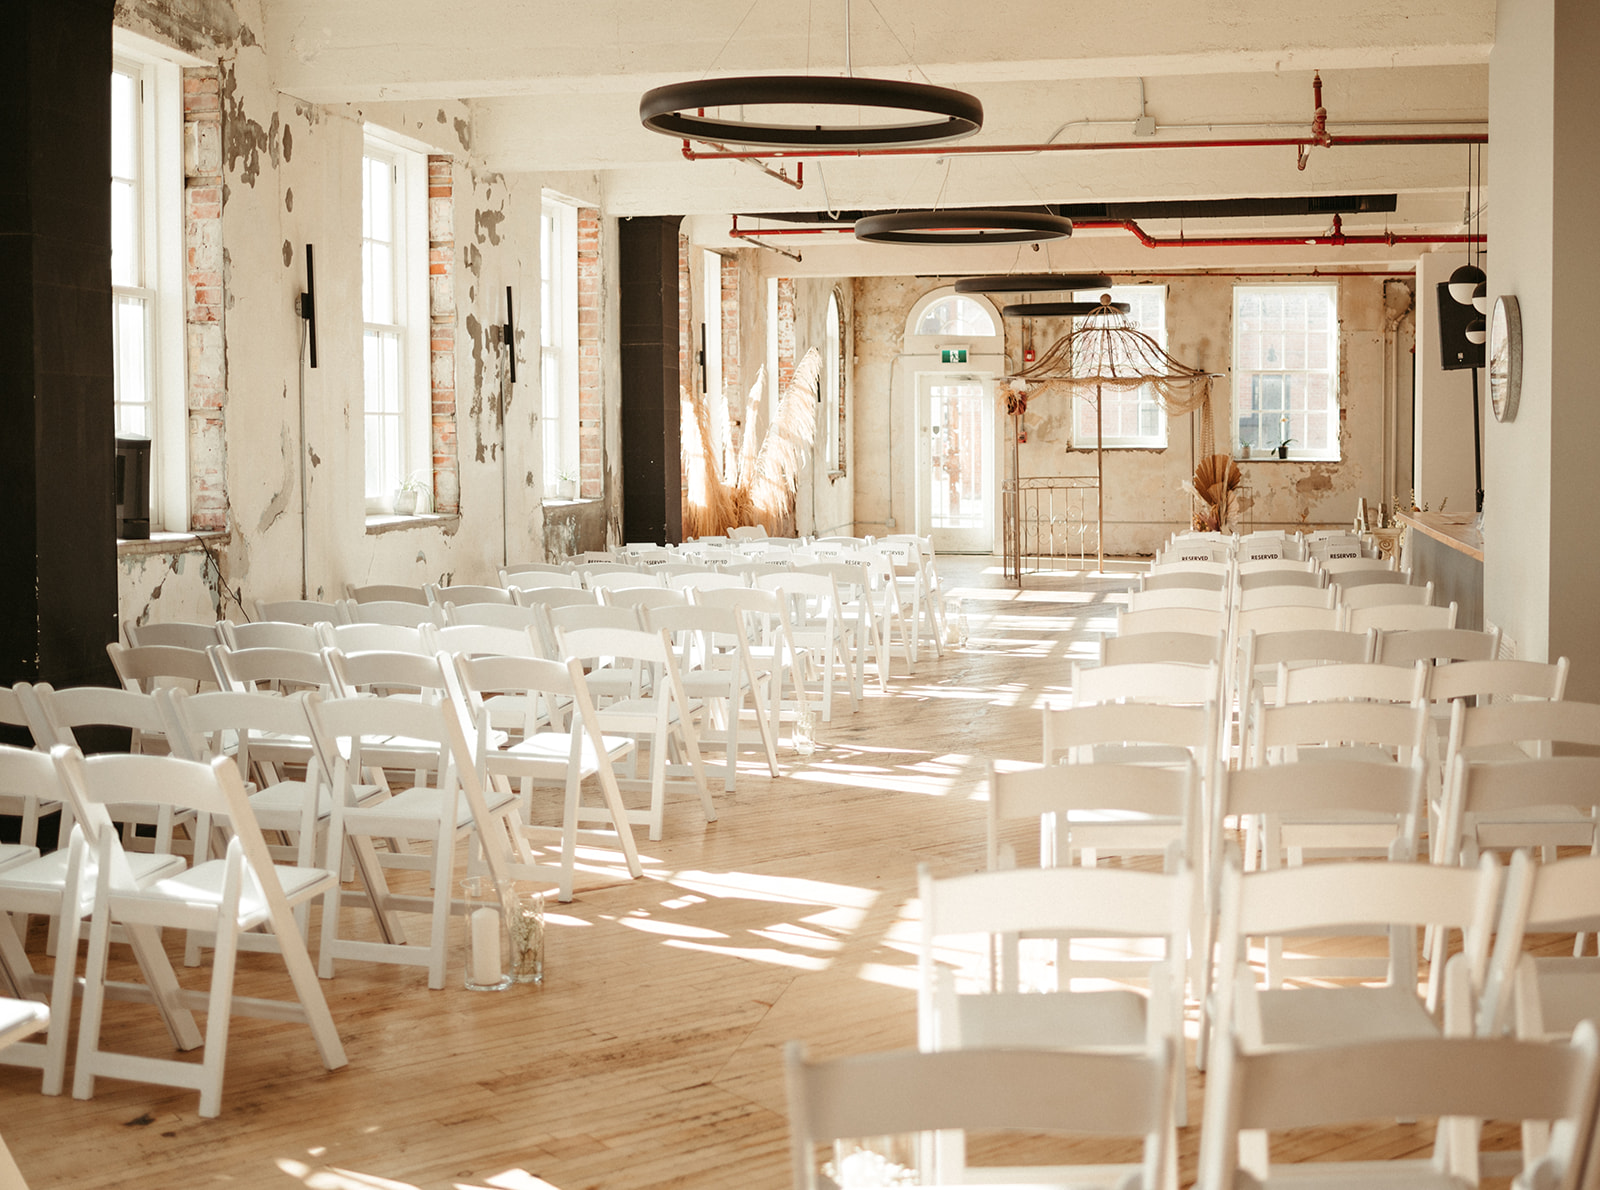 Bright and airy wedding venue with vintage vibes in Saskatoon